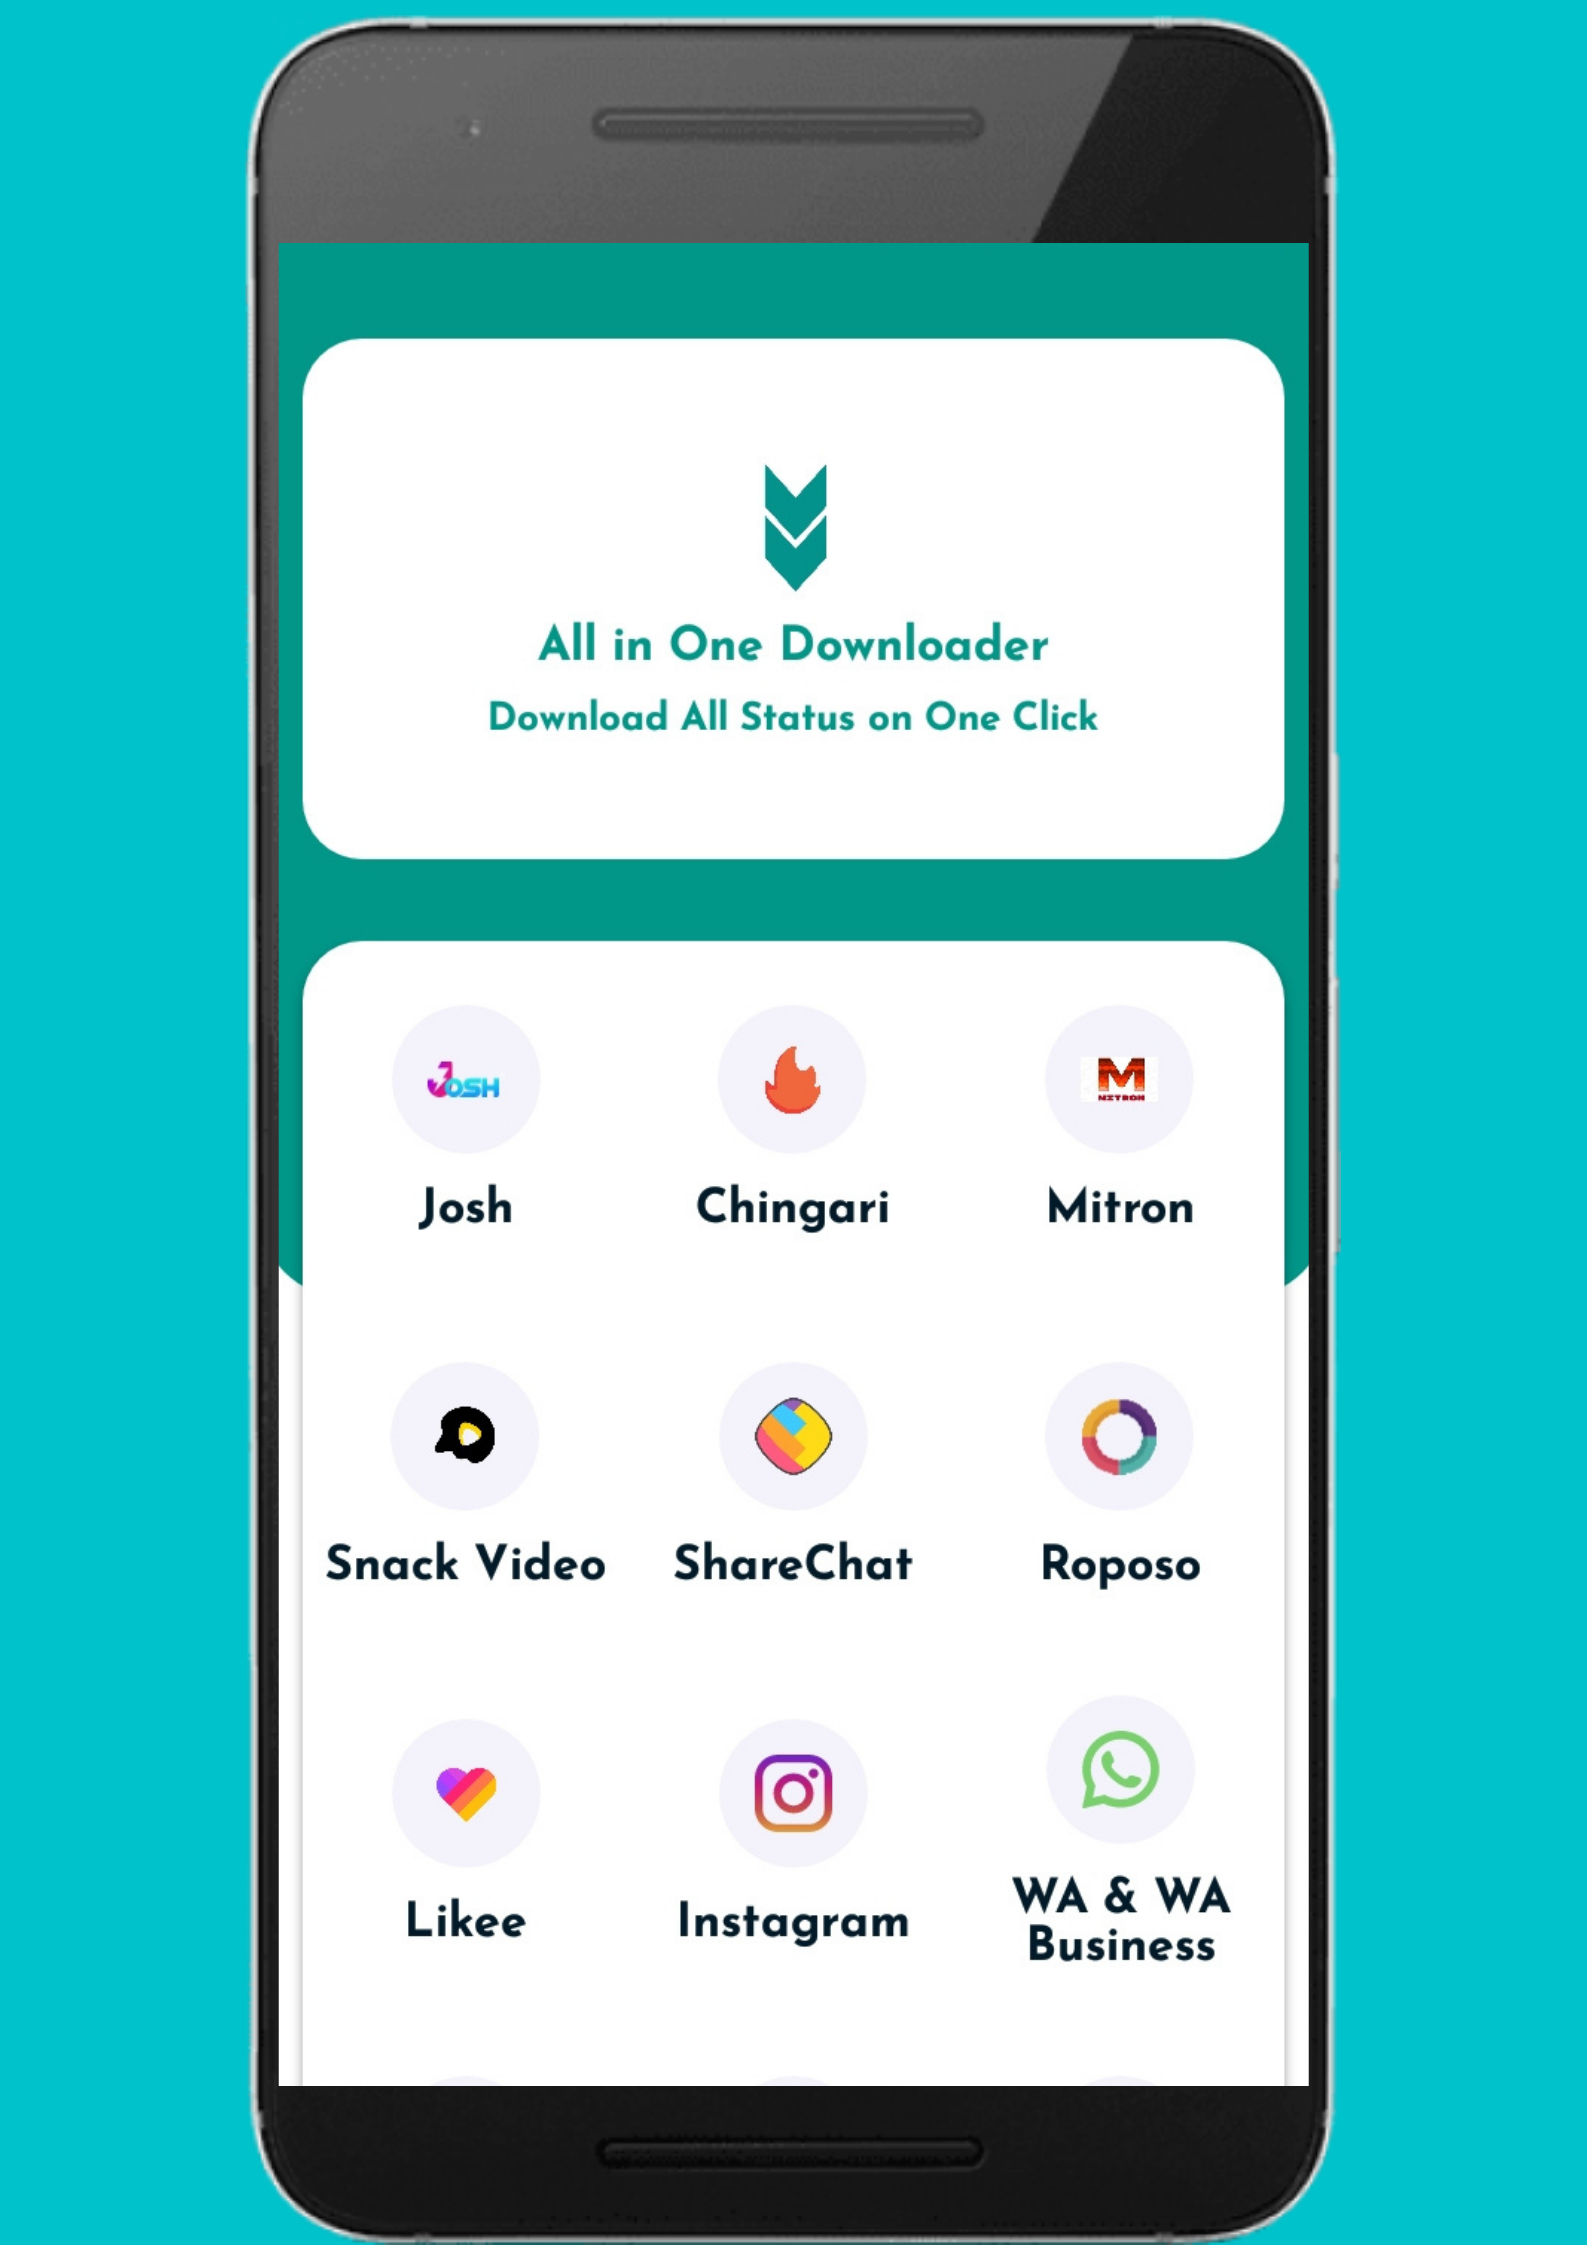 All in One Downloader